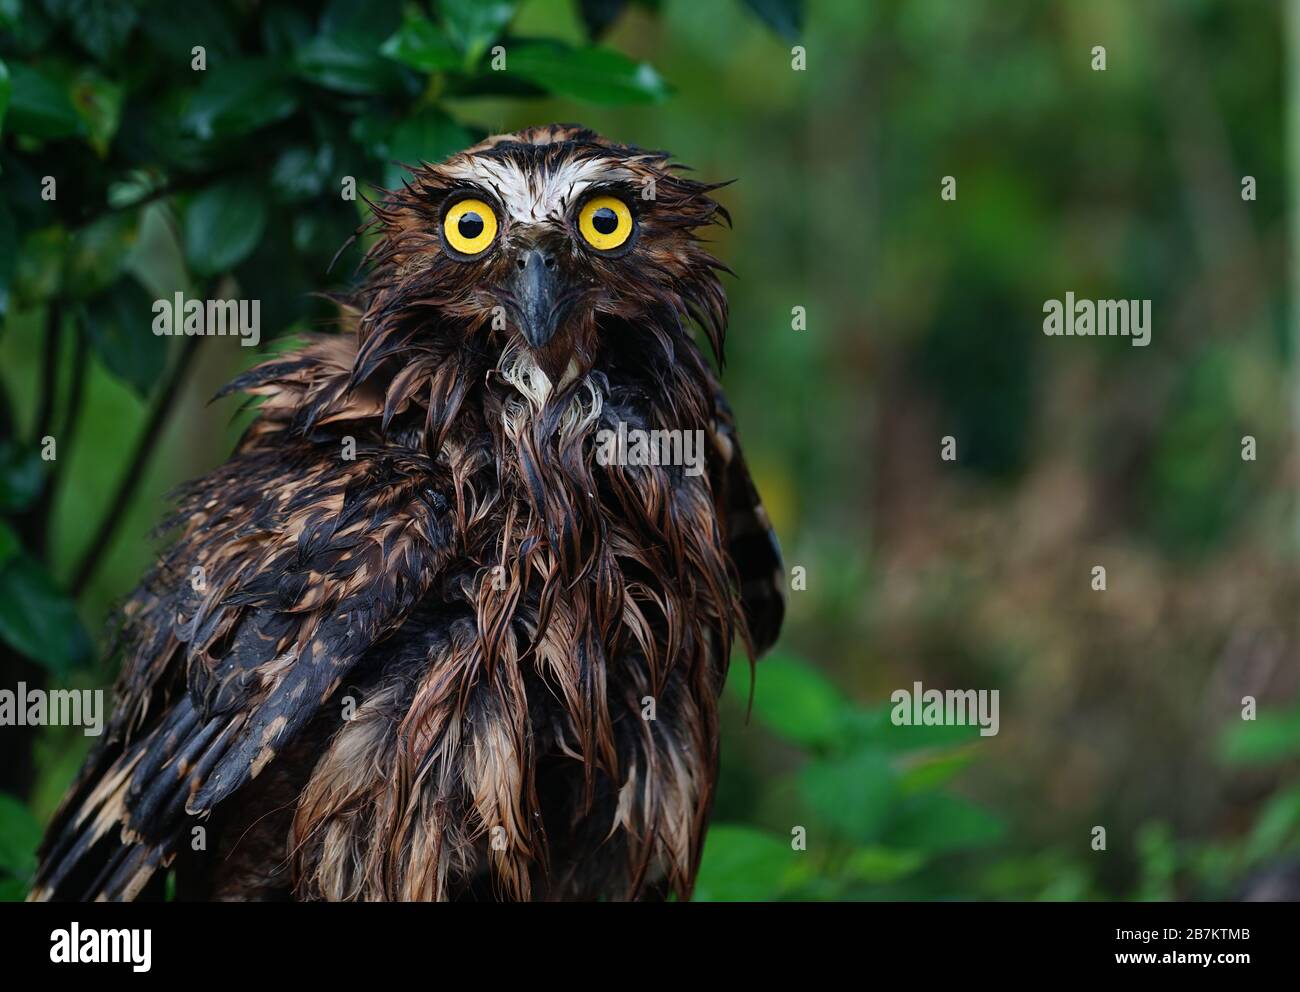 A Sumatran owl falls from a tree and enters a fish pond in Palembang on Tuesday, March 17, 2020. (Photo by Sigit Prasetya) Stock Photo